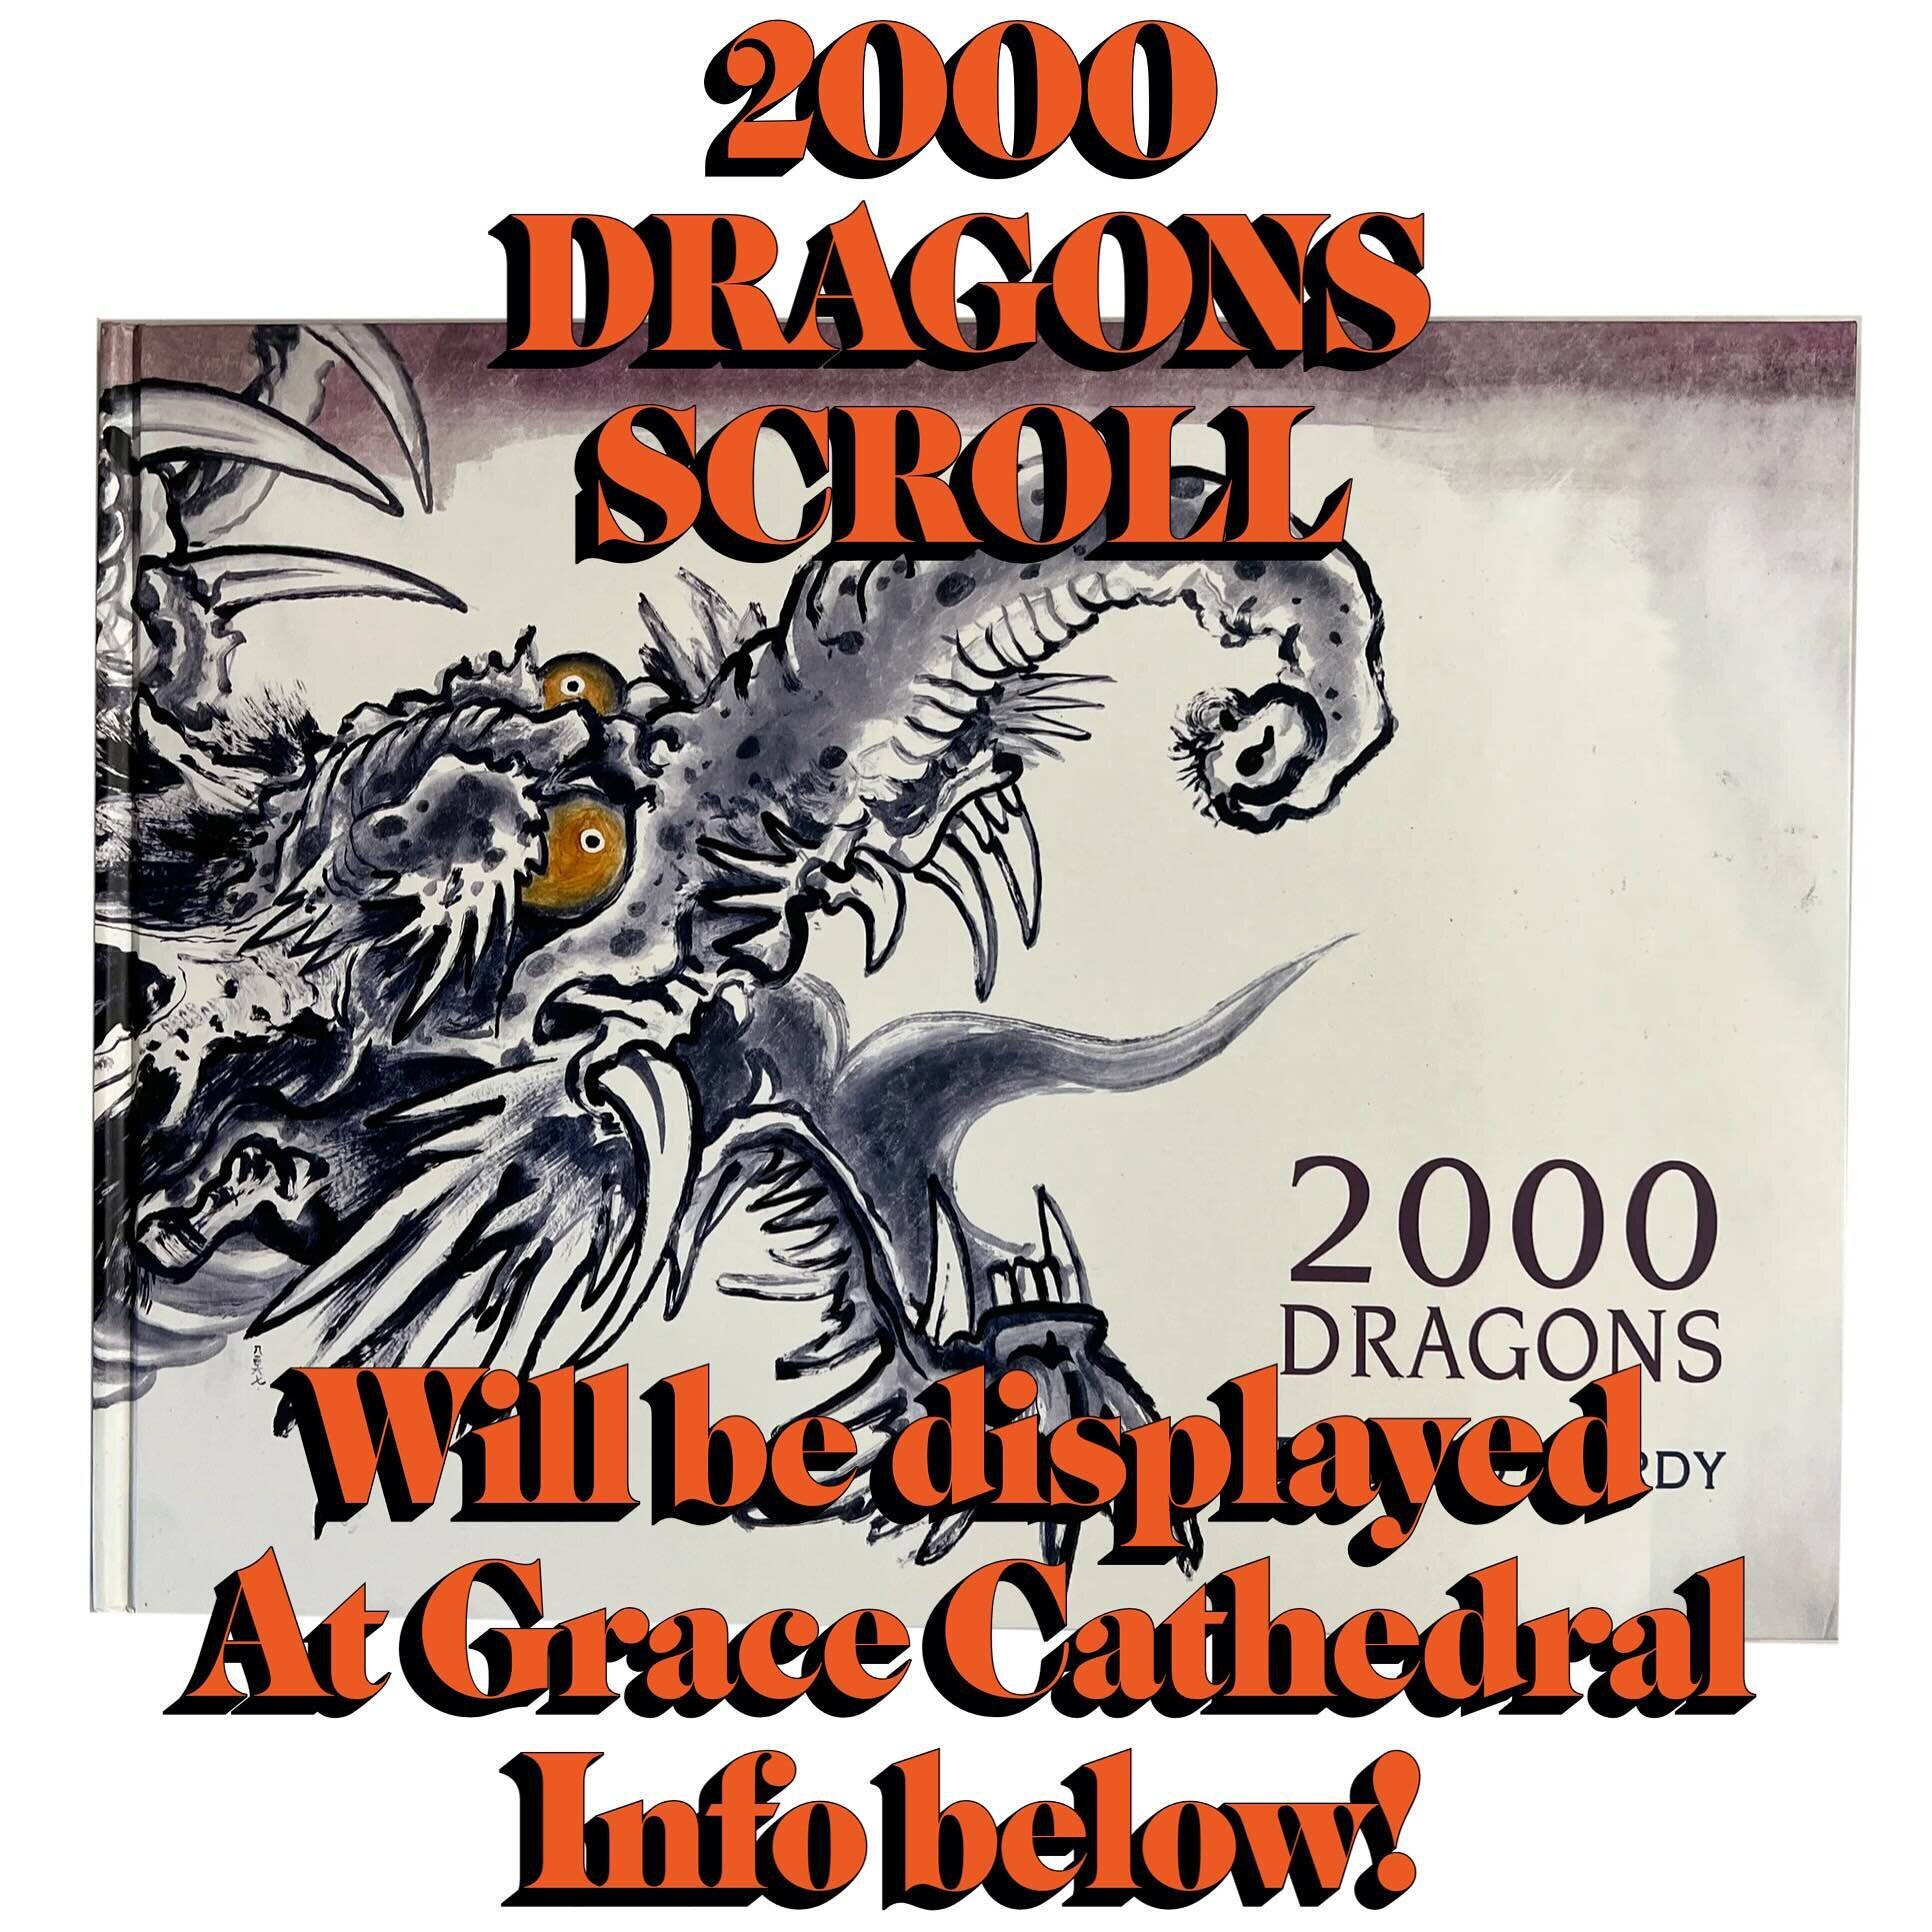 For Year of The Dragon, Grace Cathedral in San Francisco will be displaying Ed Hardy&rsquo;s 2000 Dragon Scroll in all of its glory! Viewing will be available by ticket April 27-May 27! For details and reservations please visit https://bit.ly/2000Dra